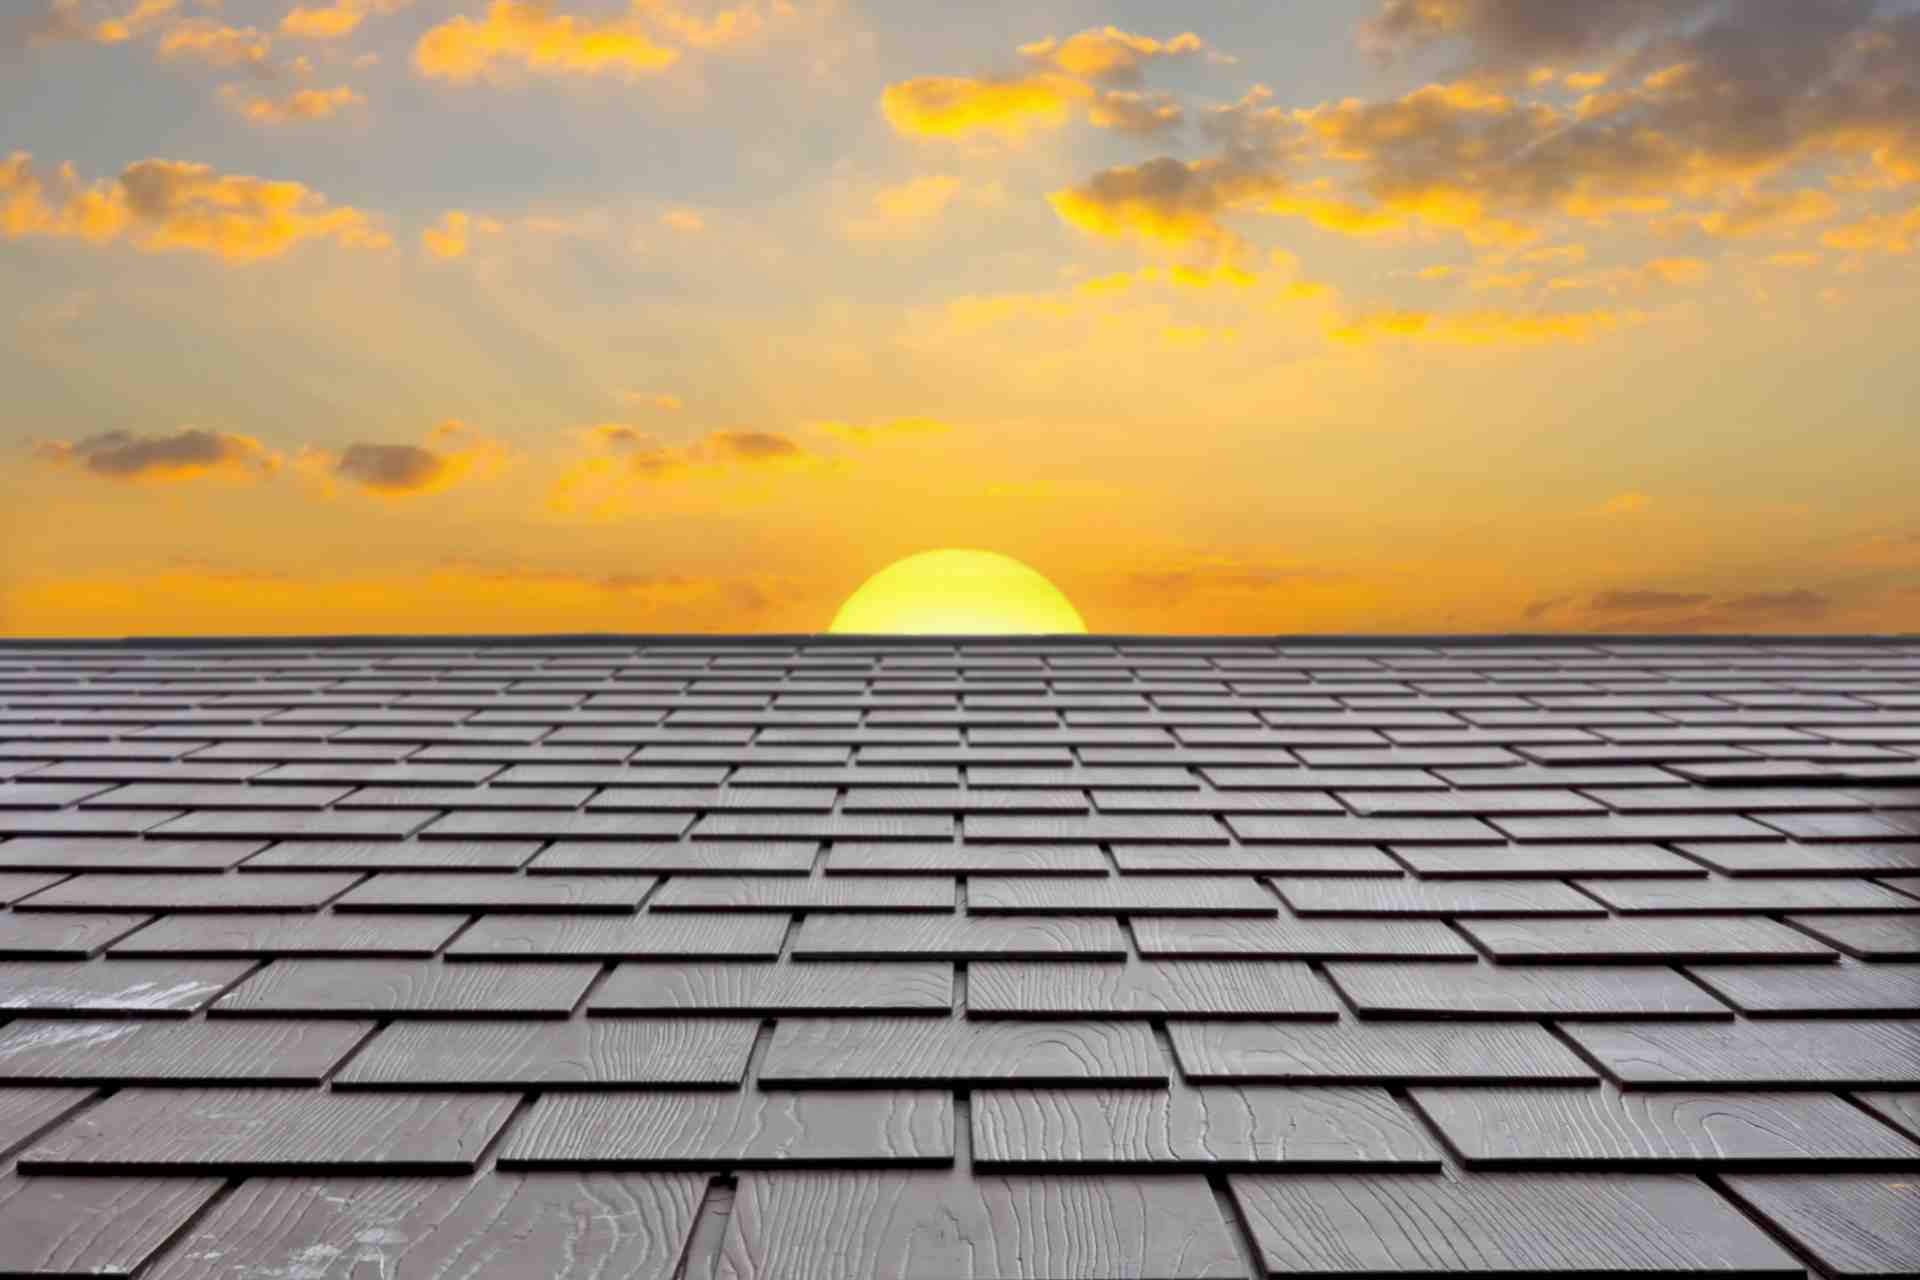 5 Maintenance Tips For Preparing Your Roof for Year-Round Protection